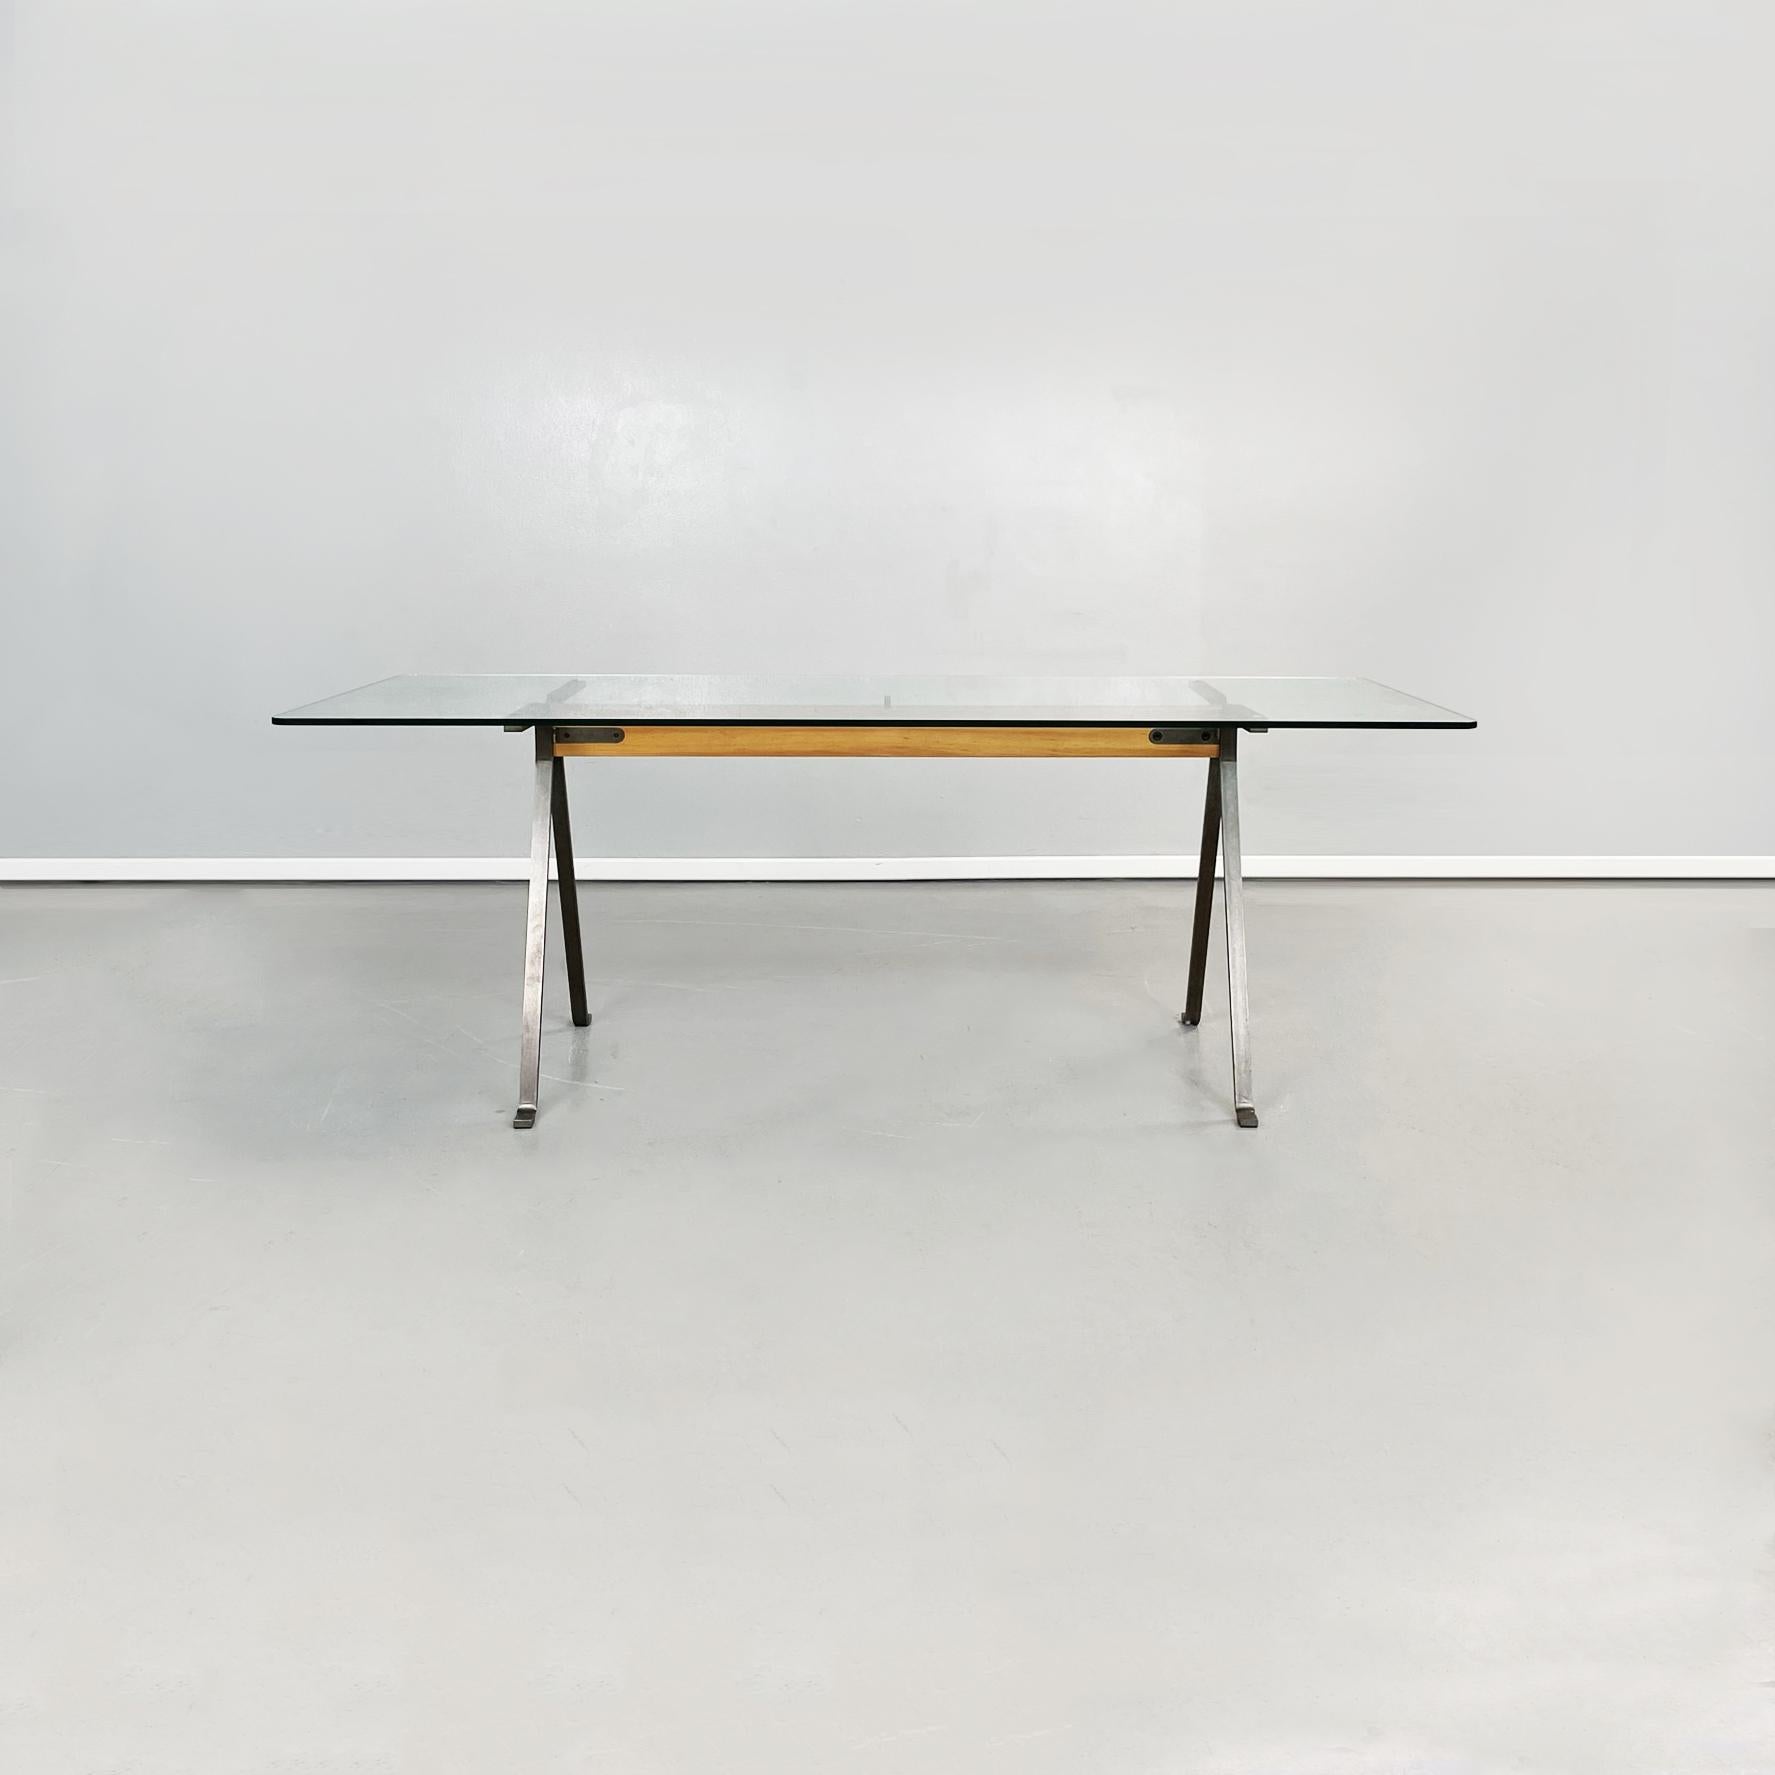 Italian modern glass, steel and wooden dining table Frate by Enzo Mari for Driade, 1973
Dining table mod. Frate with rectangular tempered glass top, with rounded corners. The central structure is composed of a solid wood beam that connects to the